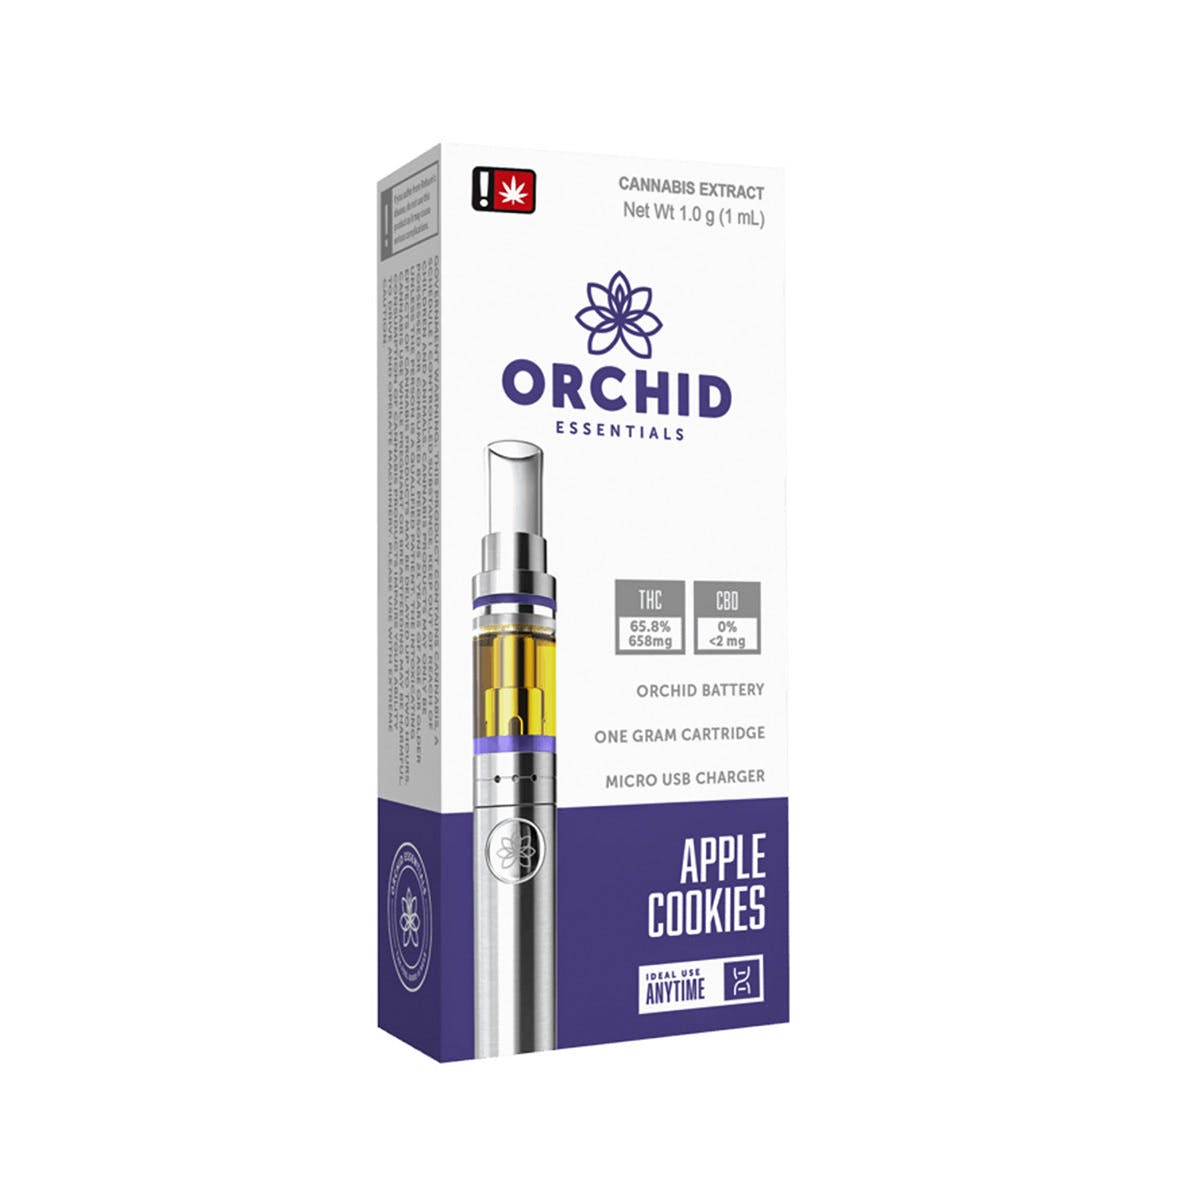 concentrate-orchid-essentials-apple-cookies-1g-kit